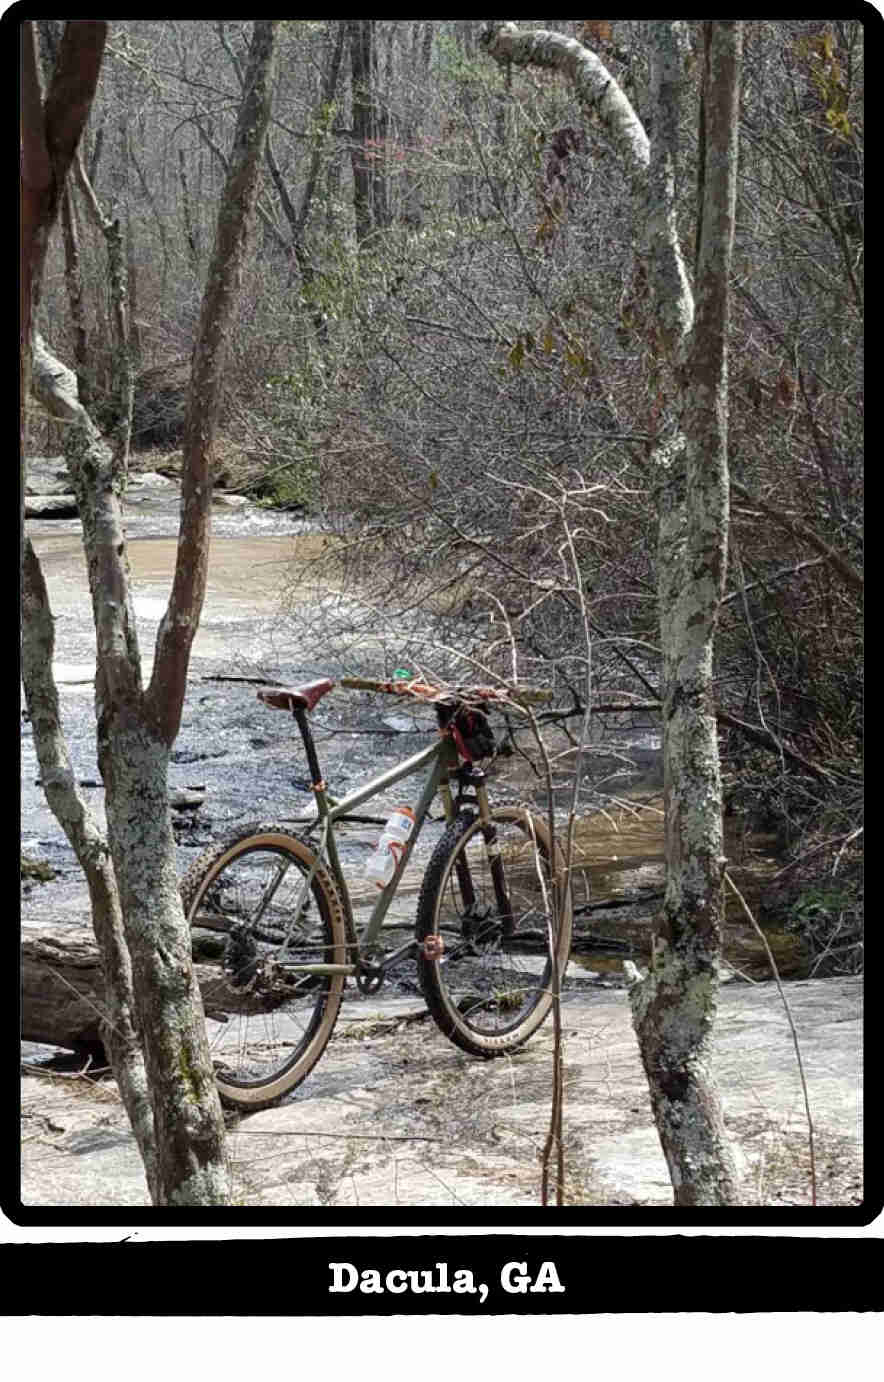 Right rear view of a Surly Karate Monkey bike, olive, at a flat rock on a river bank - Dacula, GA tag below image